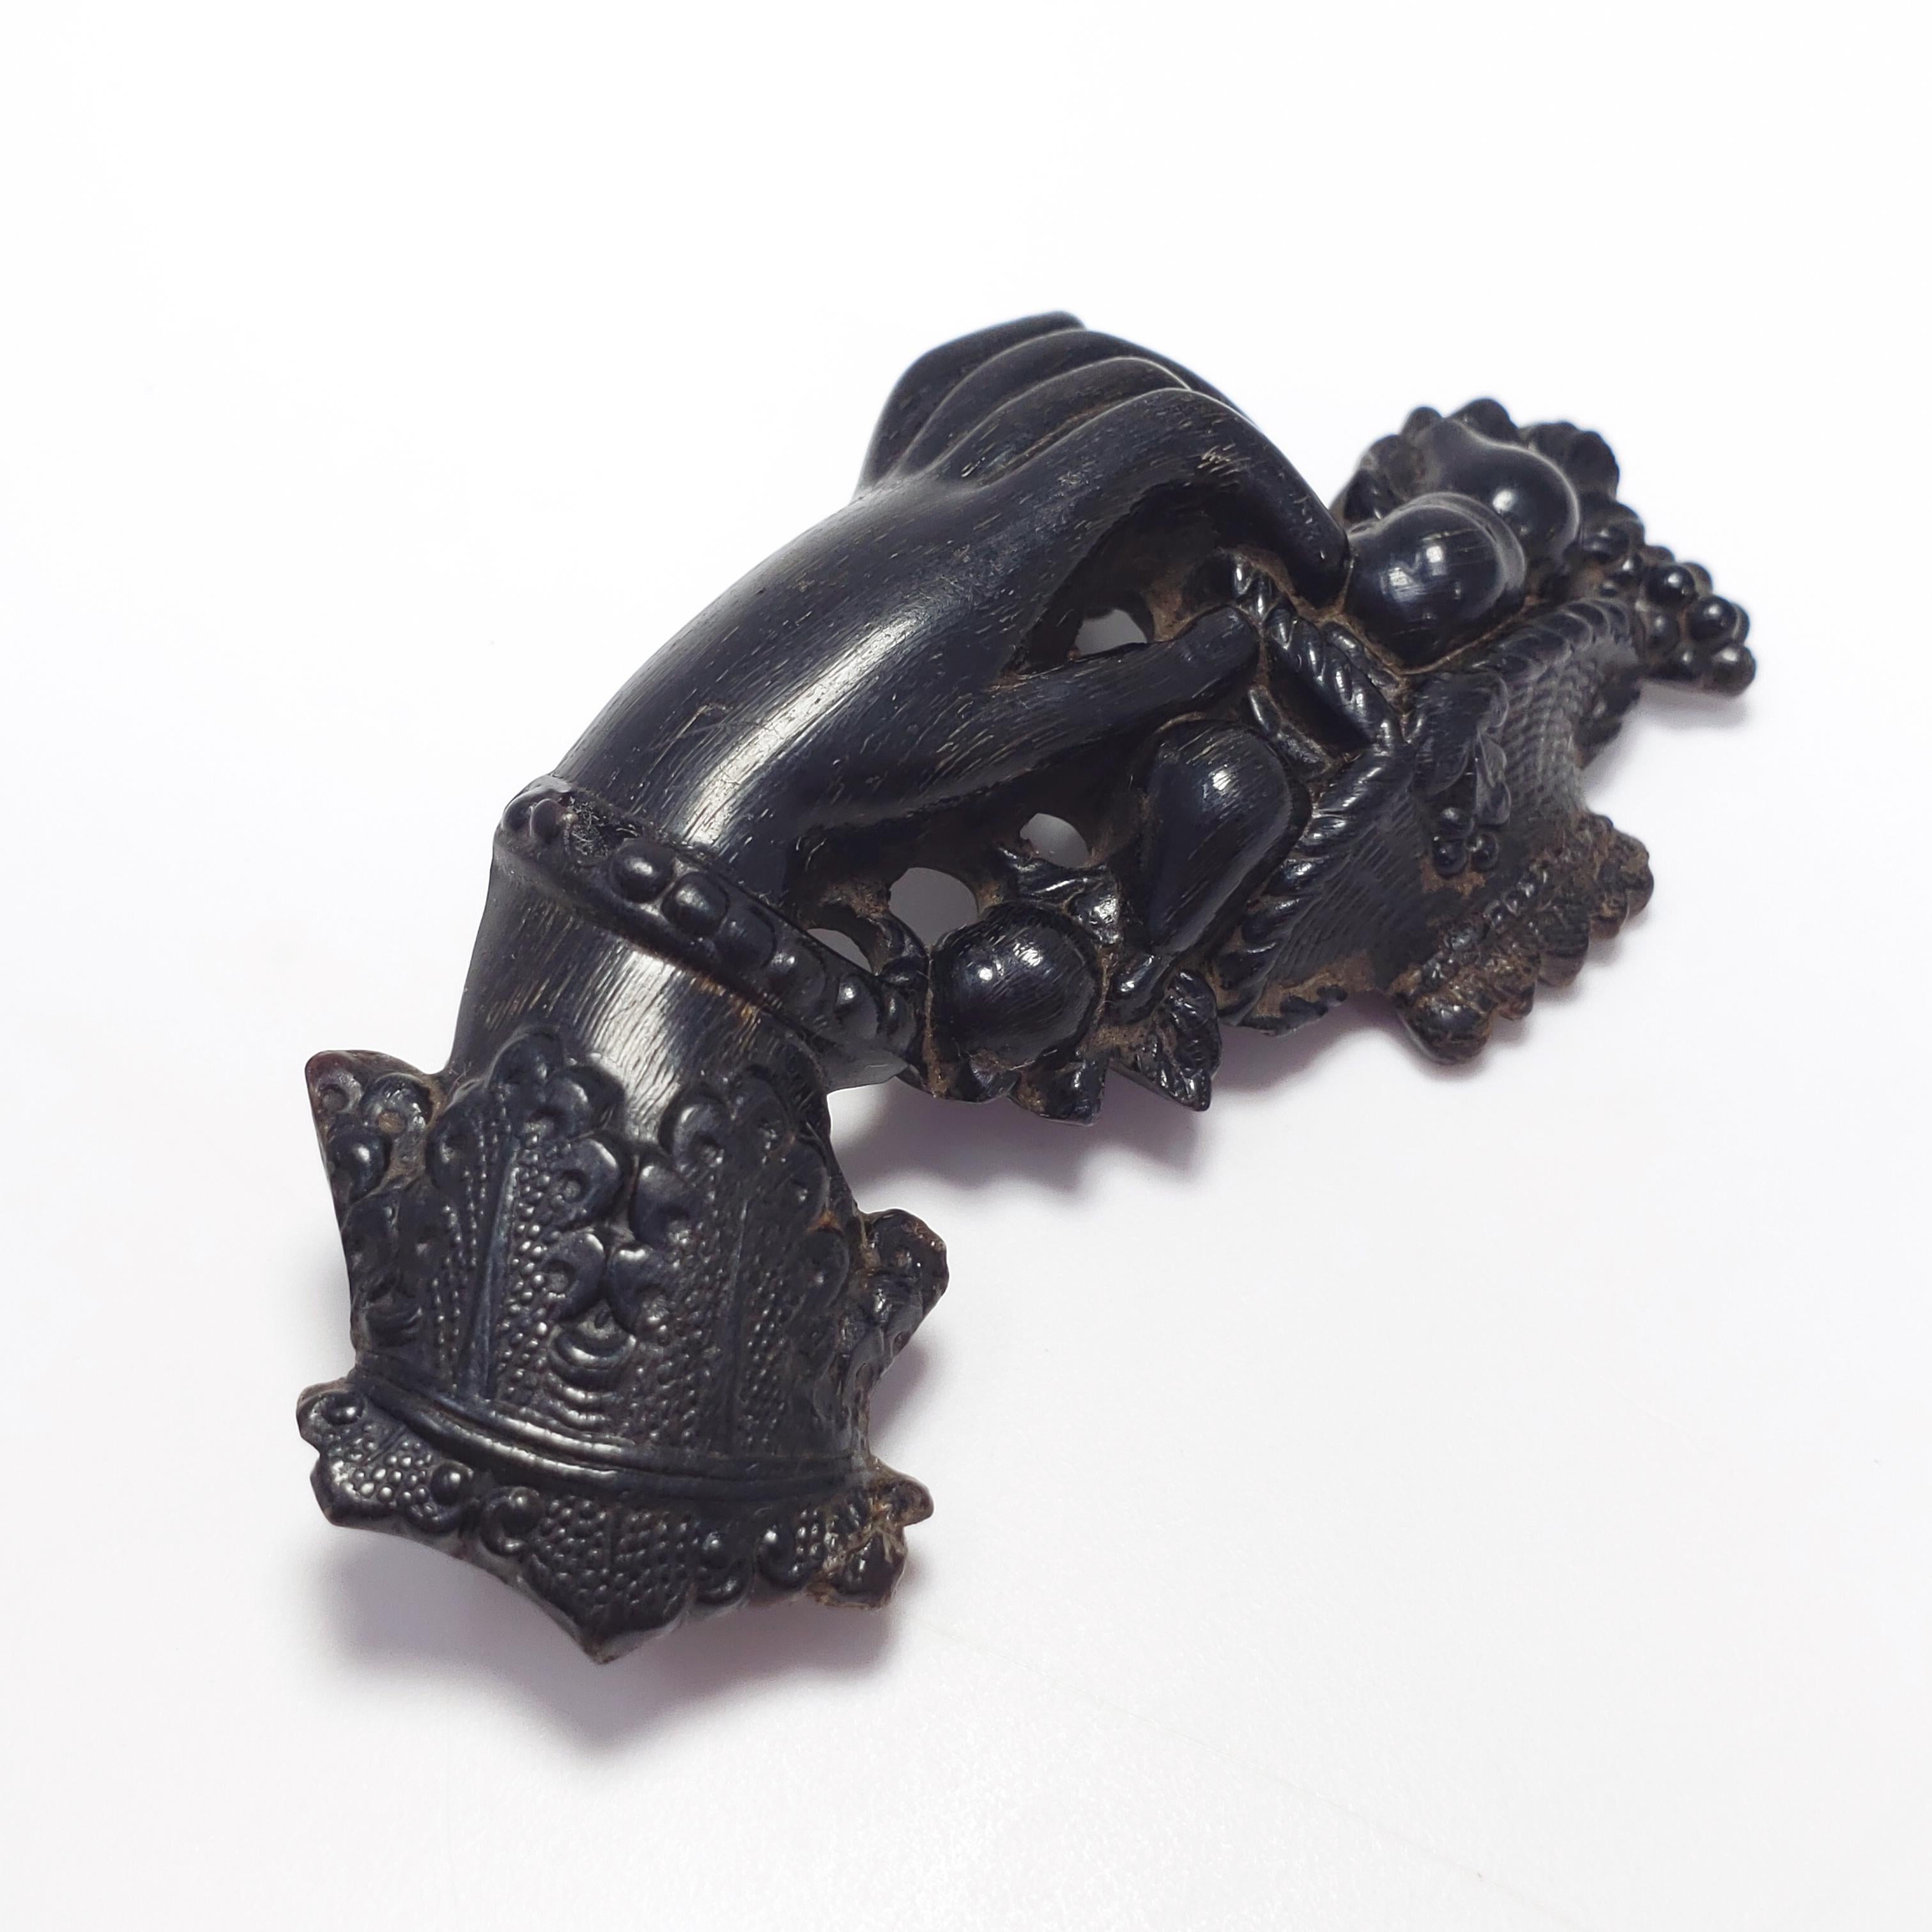 An antique  Victorian pin/brooch made of bog oak, featuring a carved hand & basket motif fastened with brass hardware.